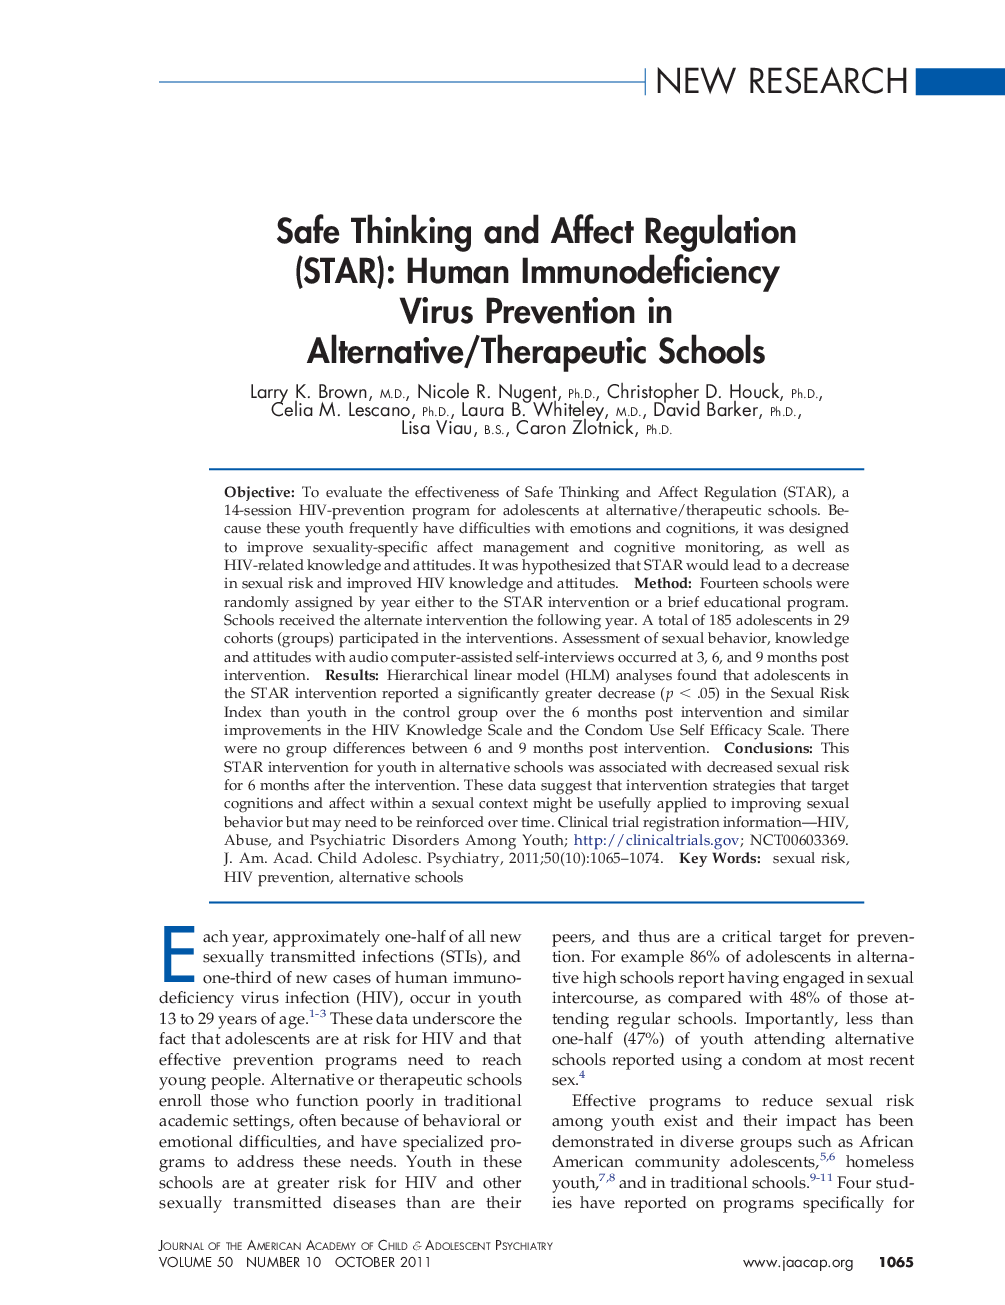 Safe Thinking and Affect Regulation (STAR): Human Immunodeficiency Virus Prevention in Alternative/Therapeutic Schools 